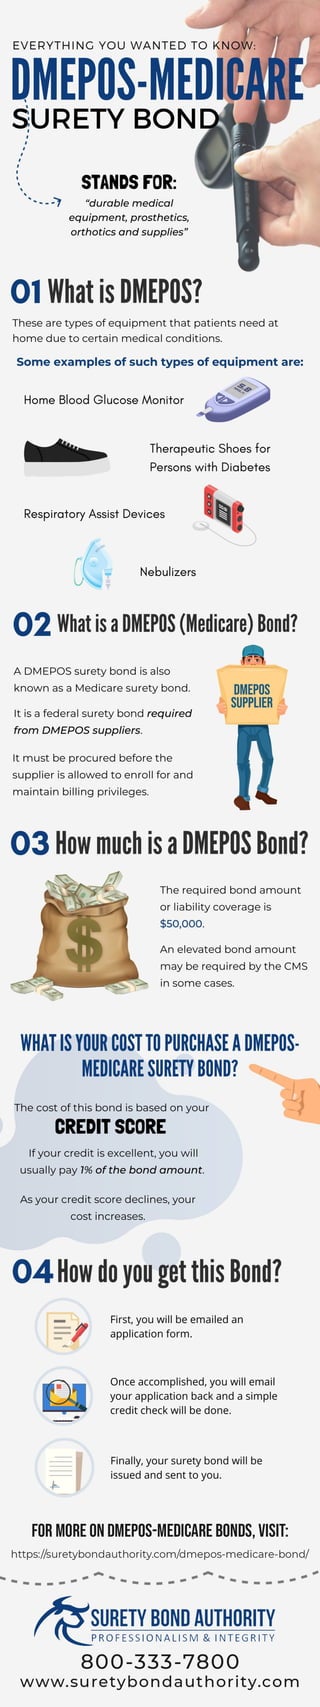 Here’s your Essential Guide to DMEPOS-Medicare Surety Bonds